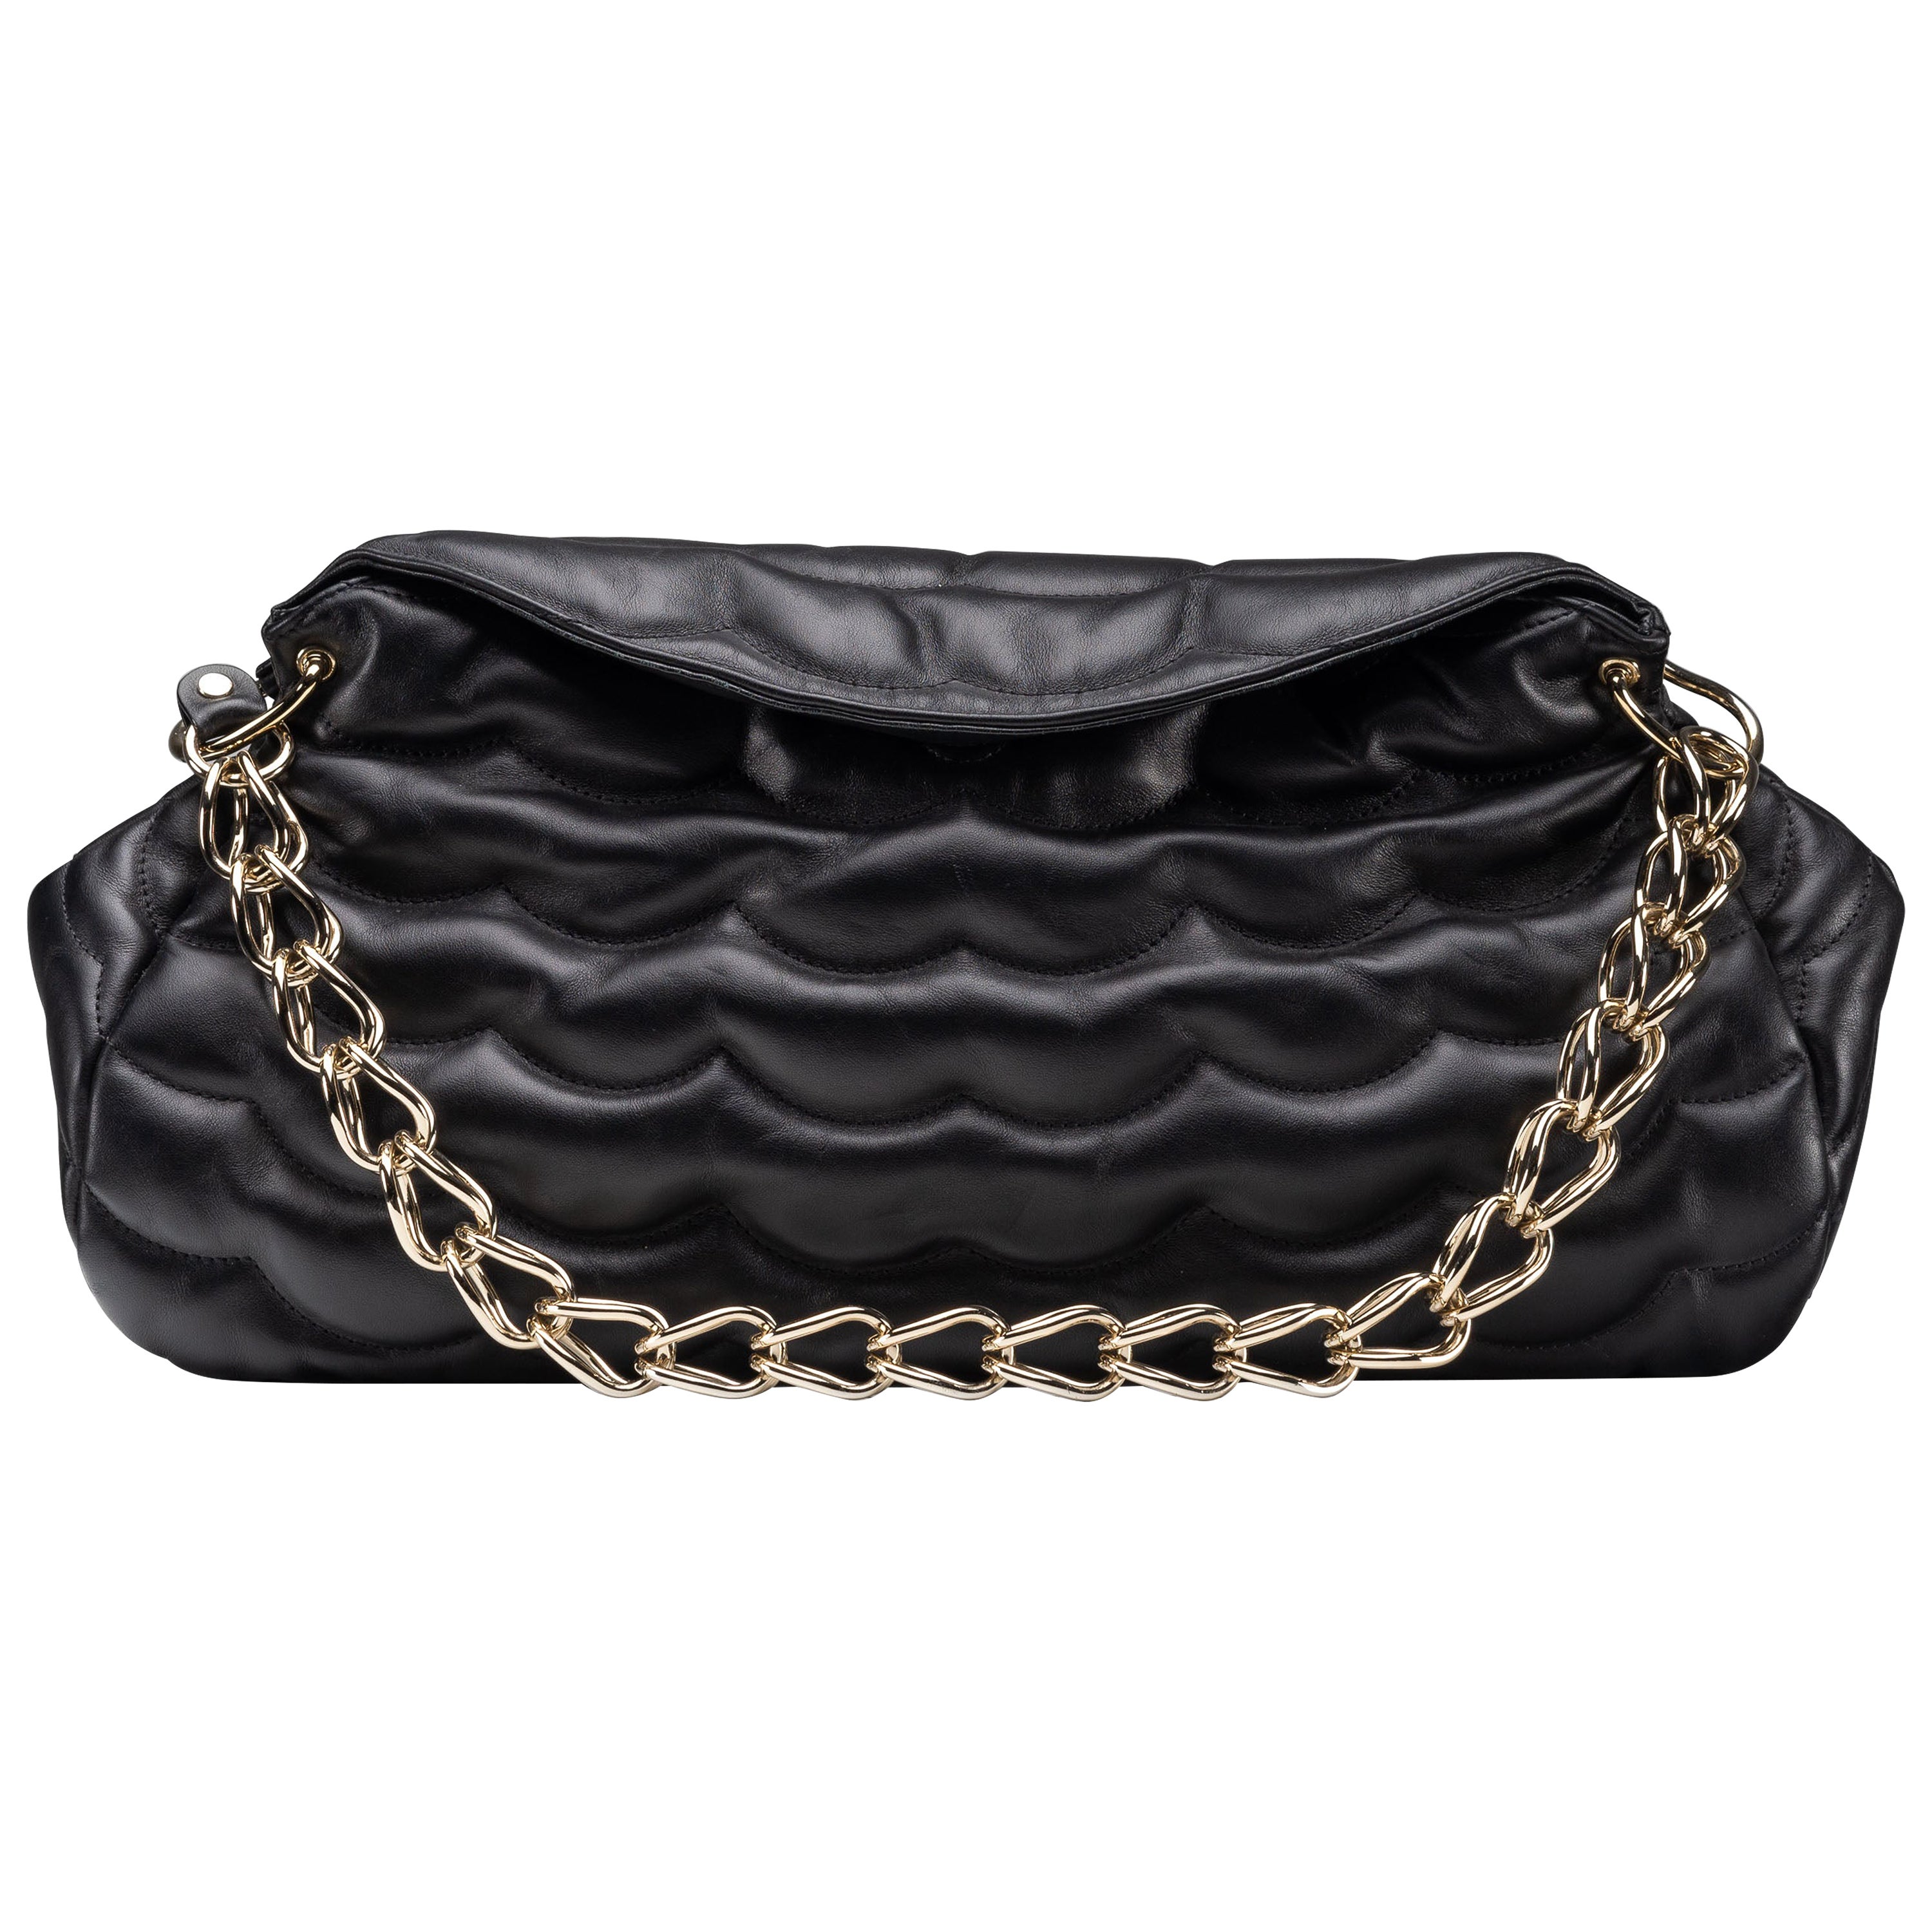 Chloe Juana Black Chain Bag Quilted Leather Rare For Sale